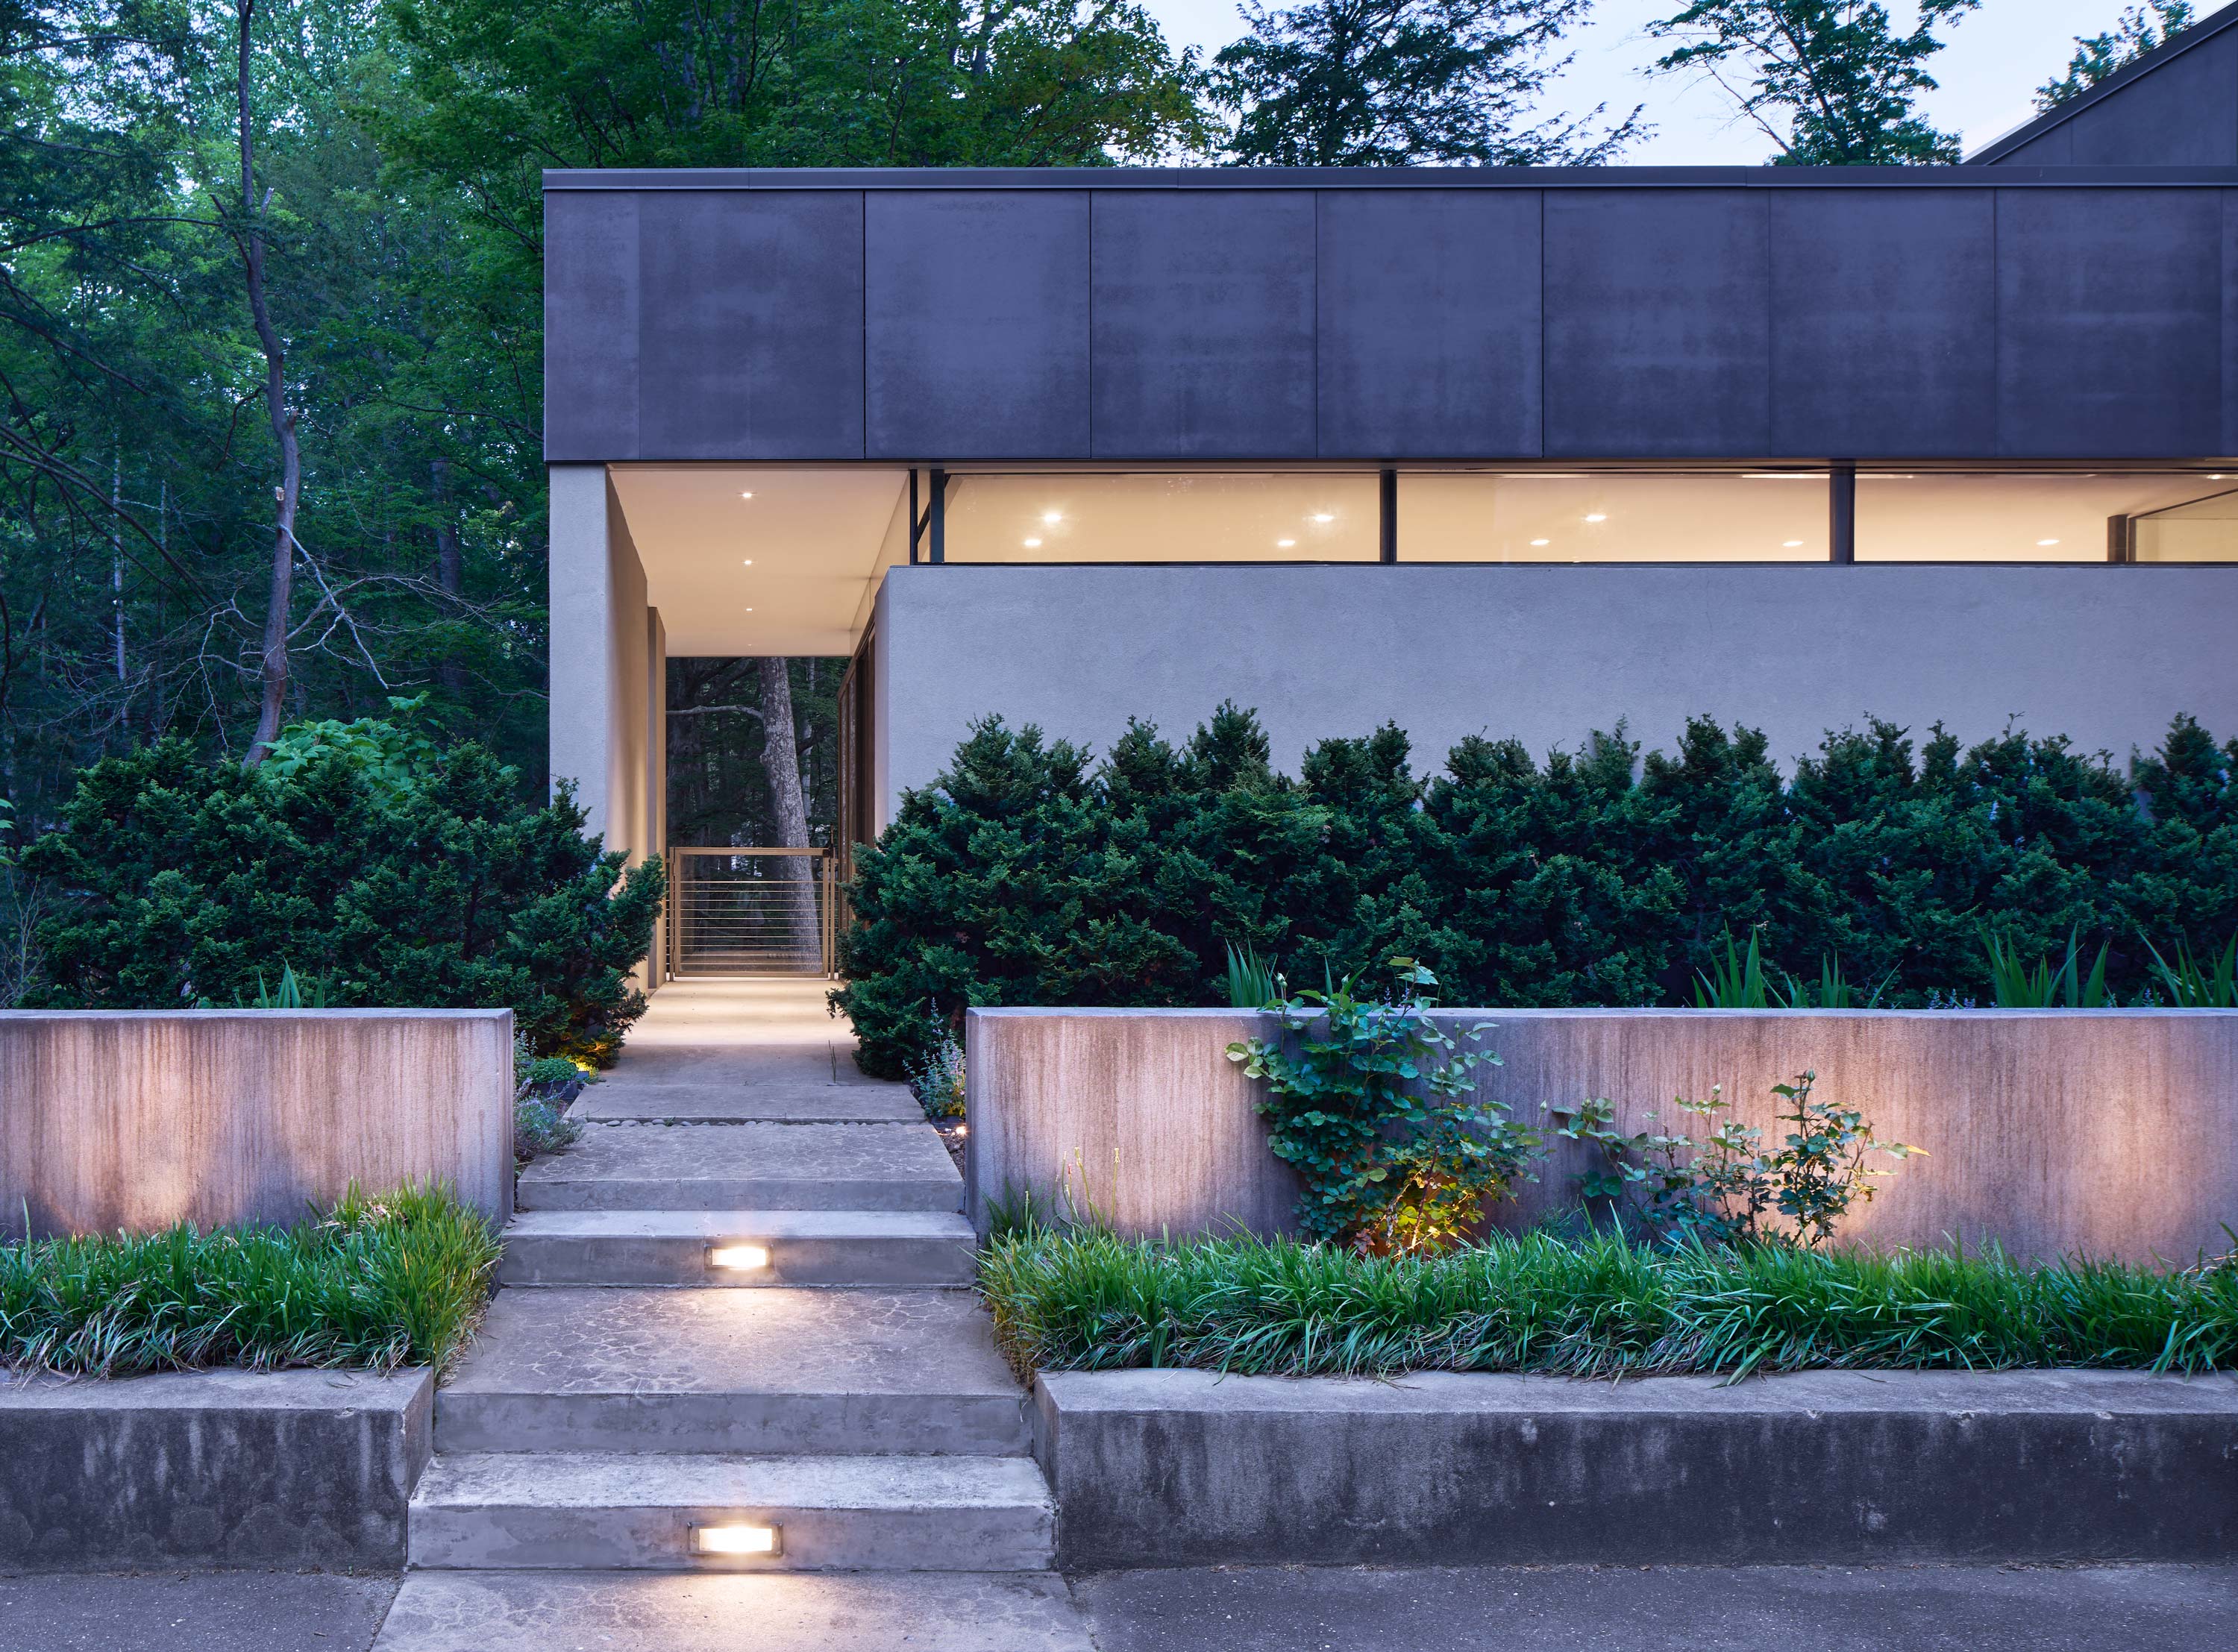 Exterior photo of Weston Residence by Specht Novak Architects. Shot by Jasper Lazor, featuring a welcoming entryway, and the harmony between the organic surroundings and the concrete and glass home.